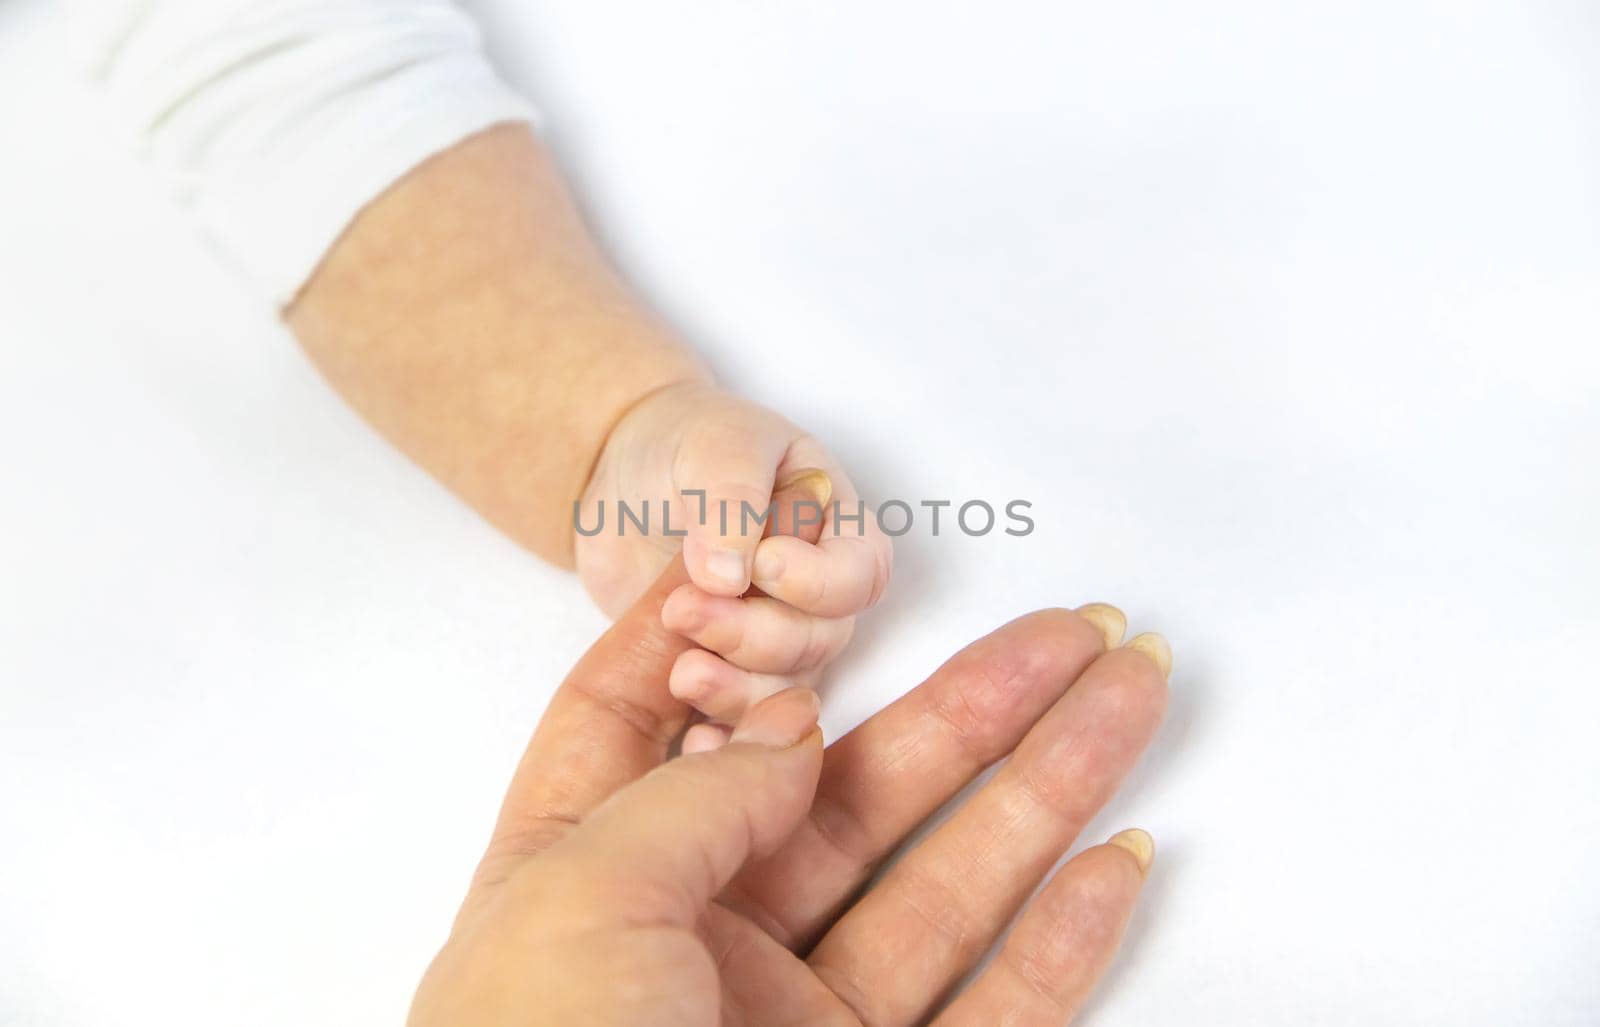 Baby hands with mom's hands against white background. Selective focus. People.